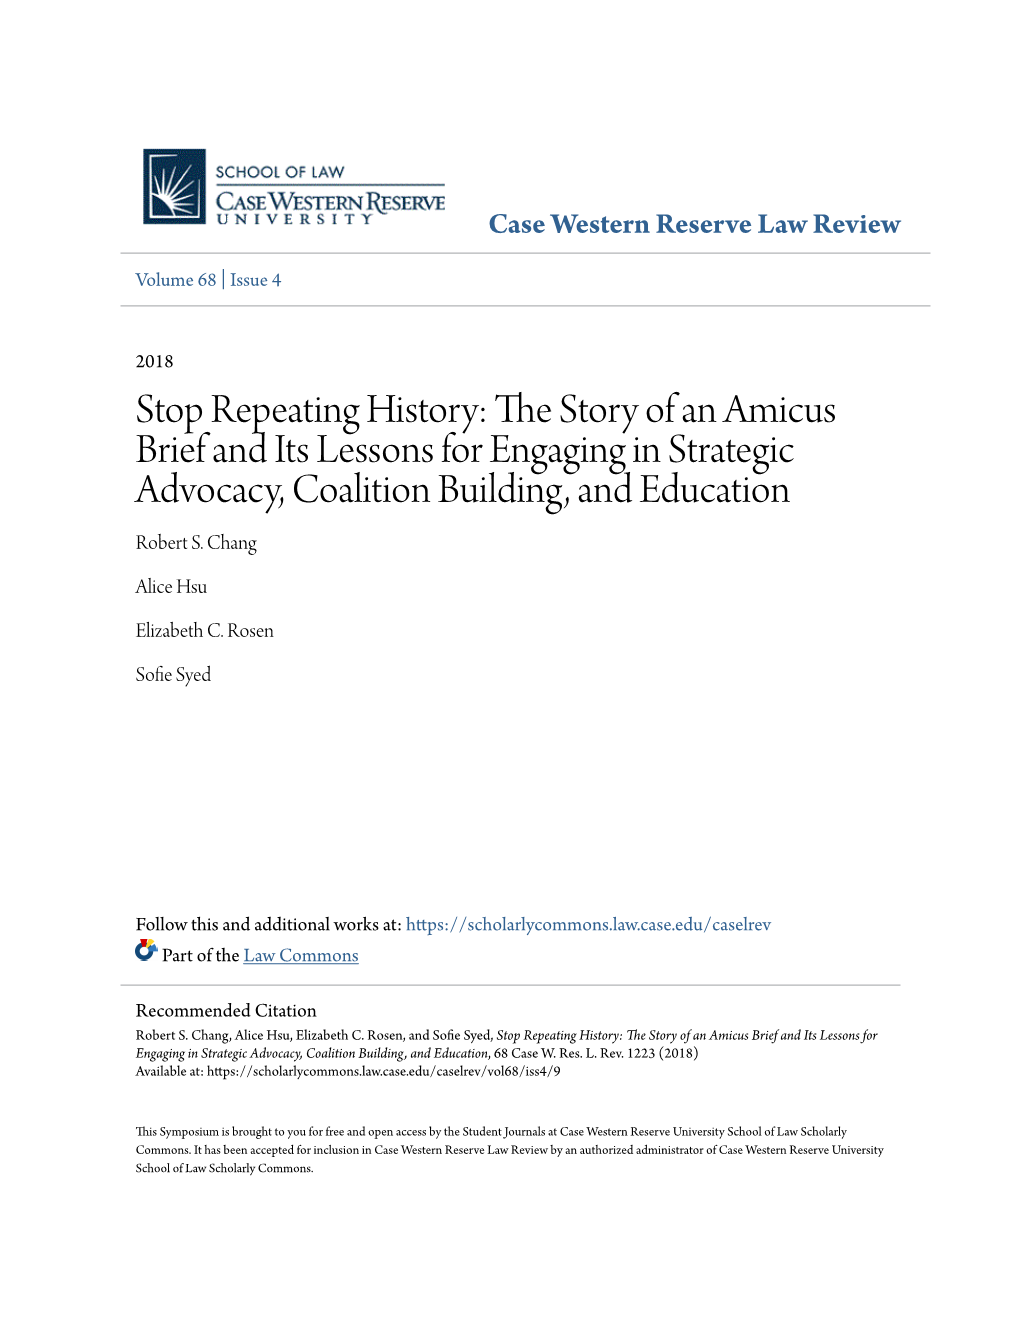 Stop Repeating History: the Story of an Amicus Brief and Its Lessons for Engaging in Strategic Advocacy, Coalition Building, and Education, 68 Case W